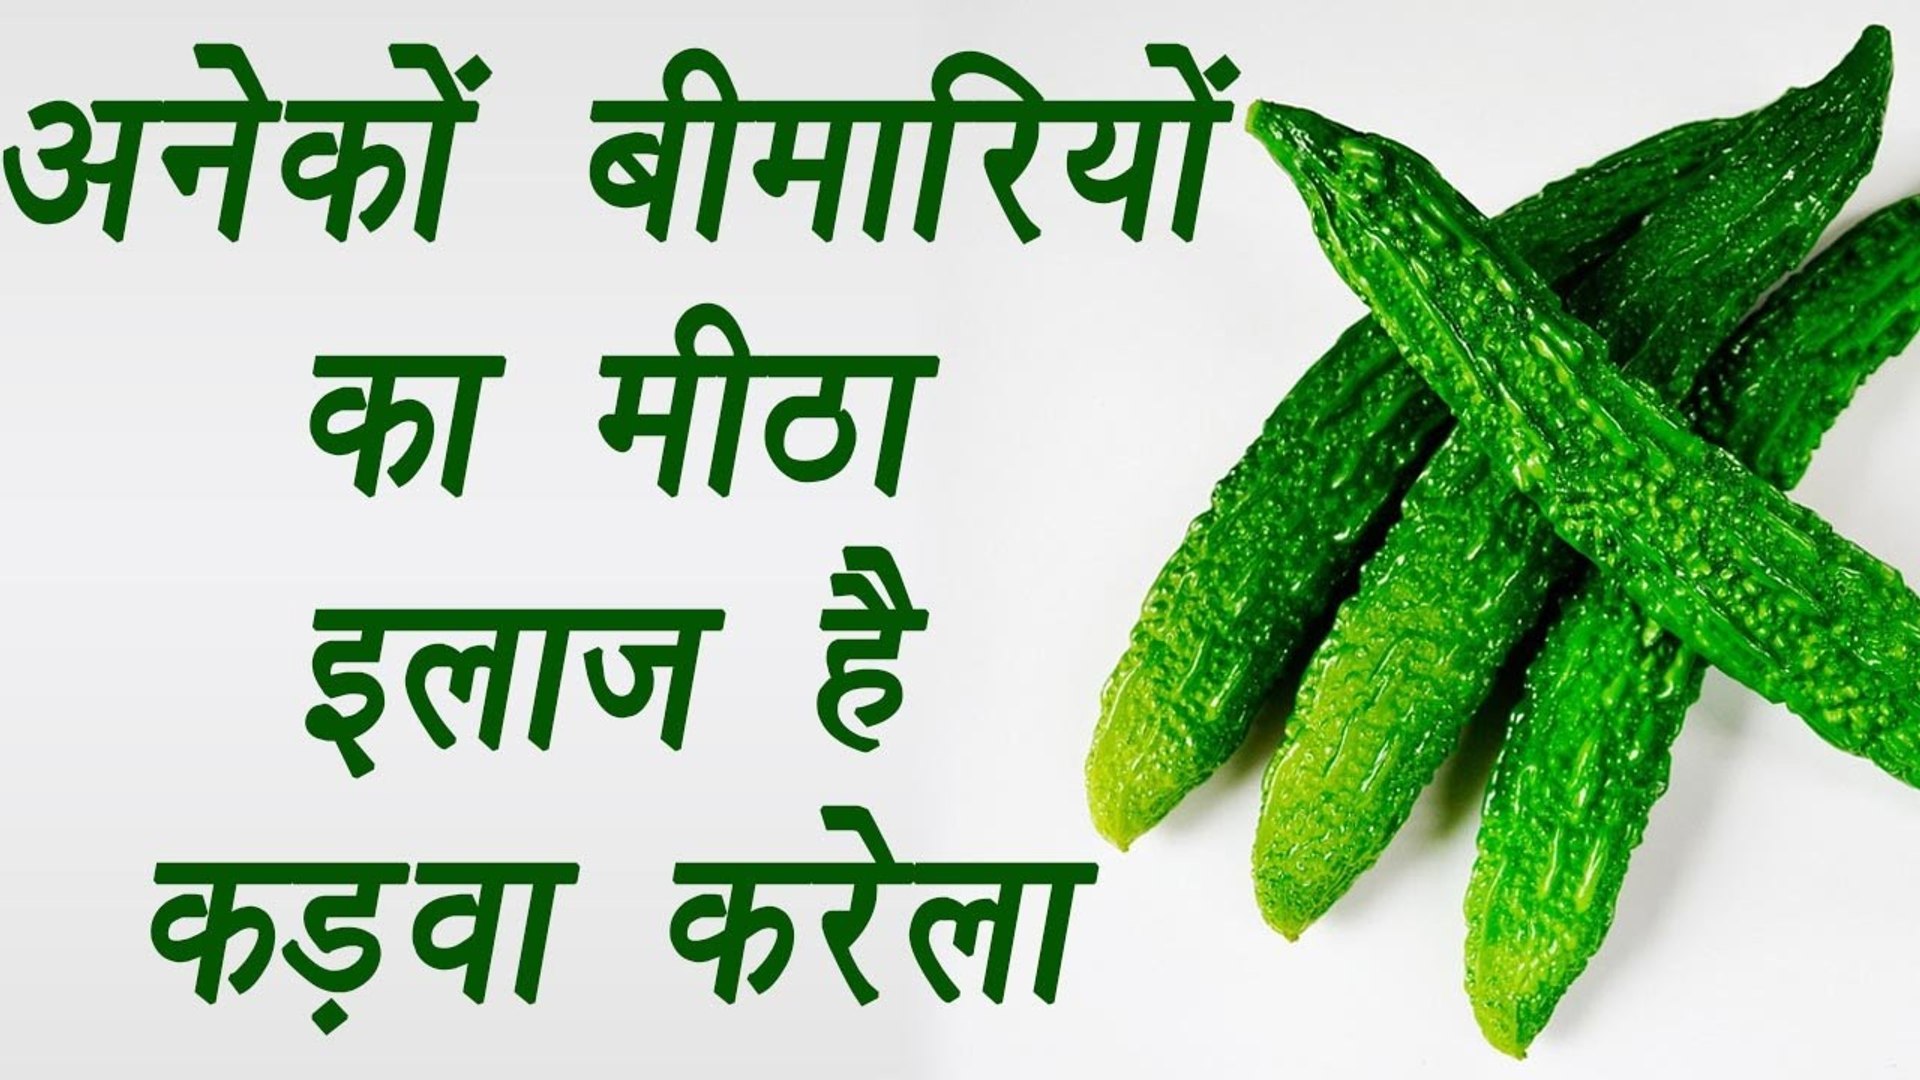 Bitter gourd will start being liked t it eliminates 5 problems from the root करेले